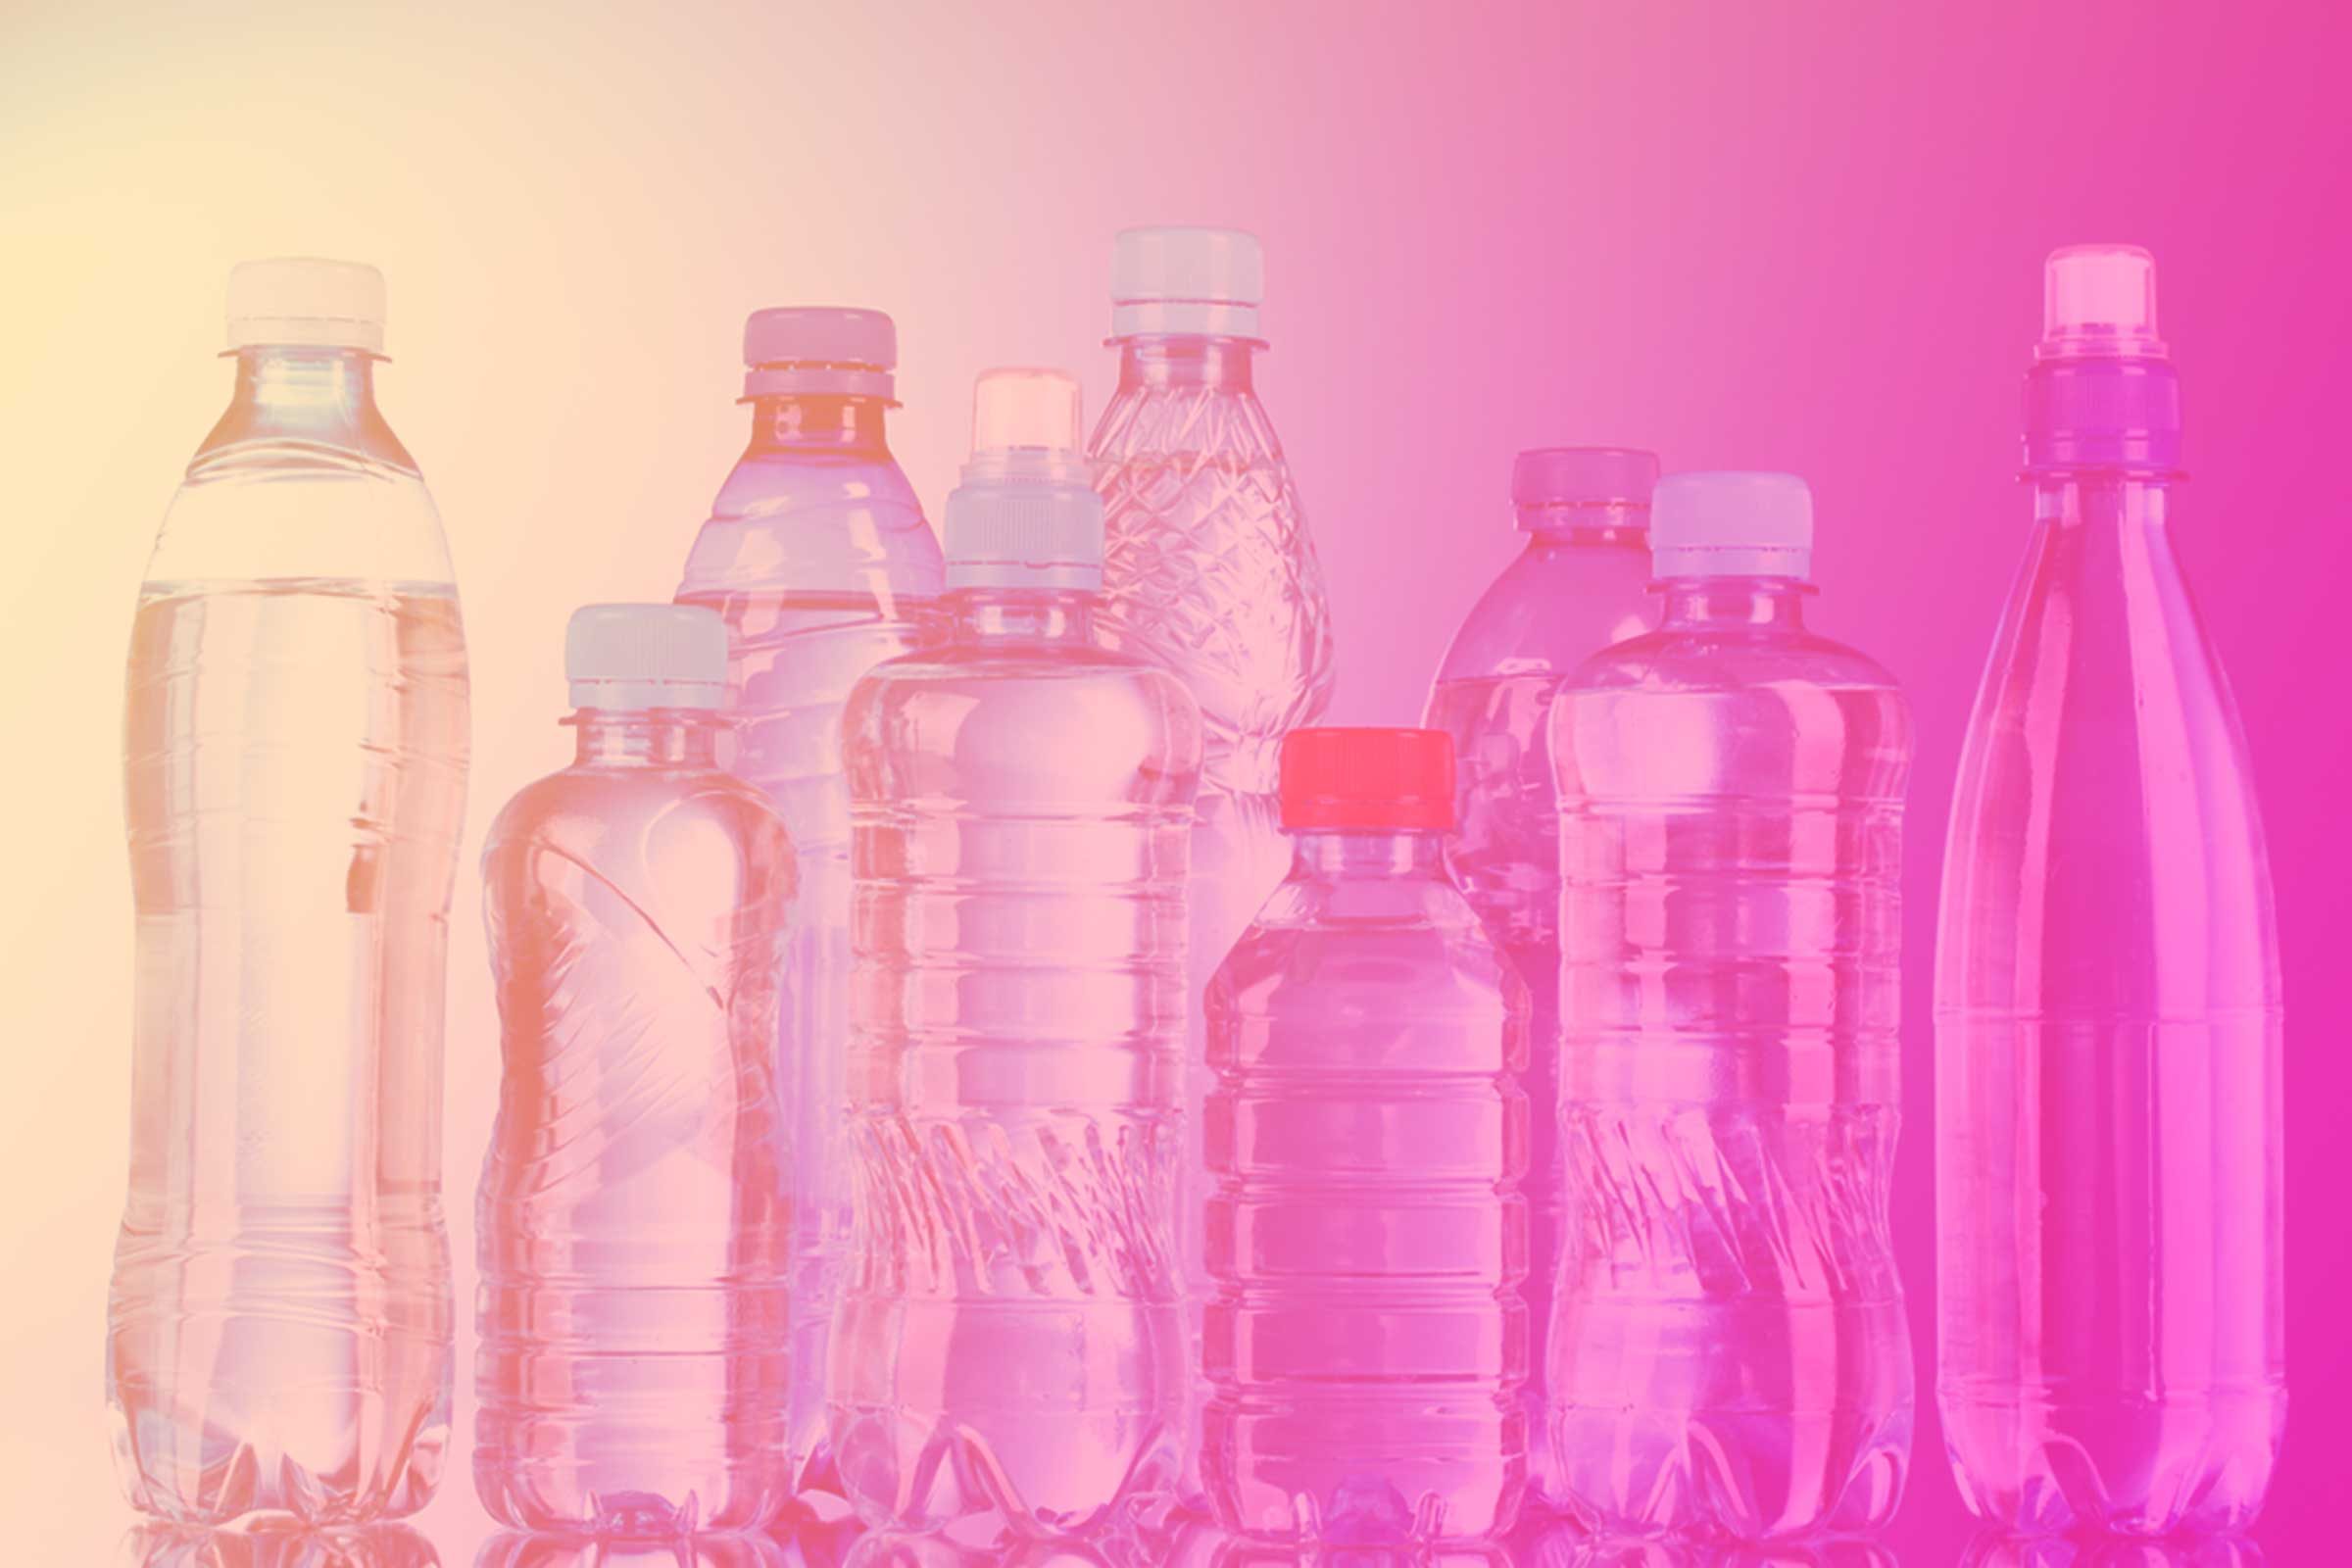 https://www.tasteofhome.com/wp-content/uploads/2019/08/01-Yes-Bottled-Water-DOES-Expire%E2%80%94and-Here%E2%80%99s-Why-You-Should-Take-It-Seriously.jpg